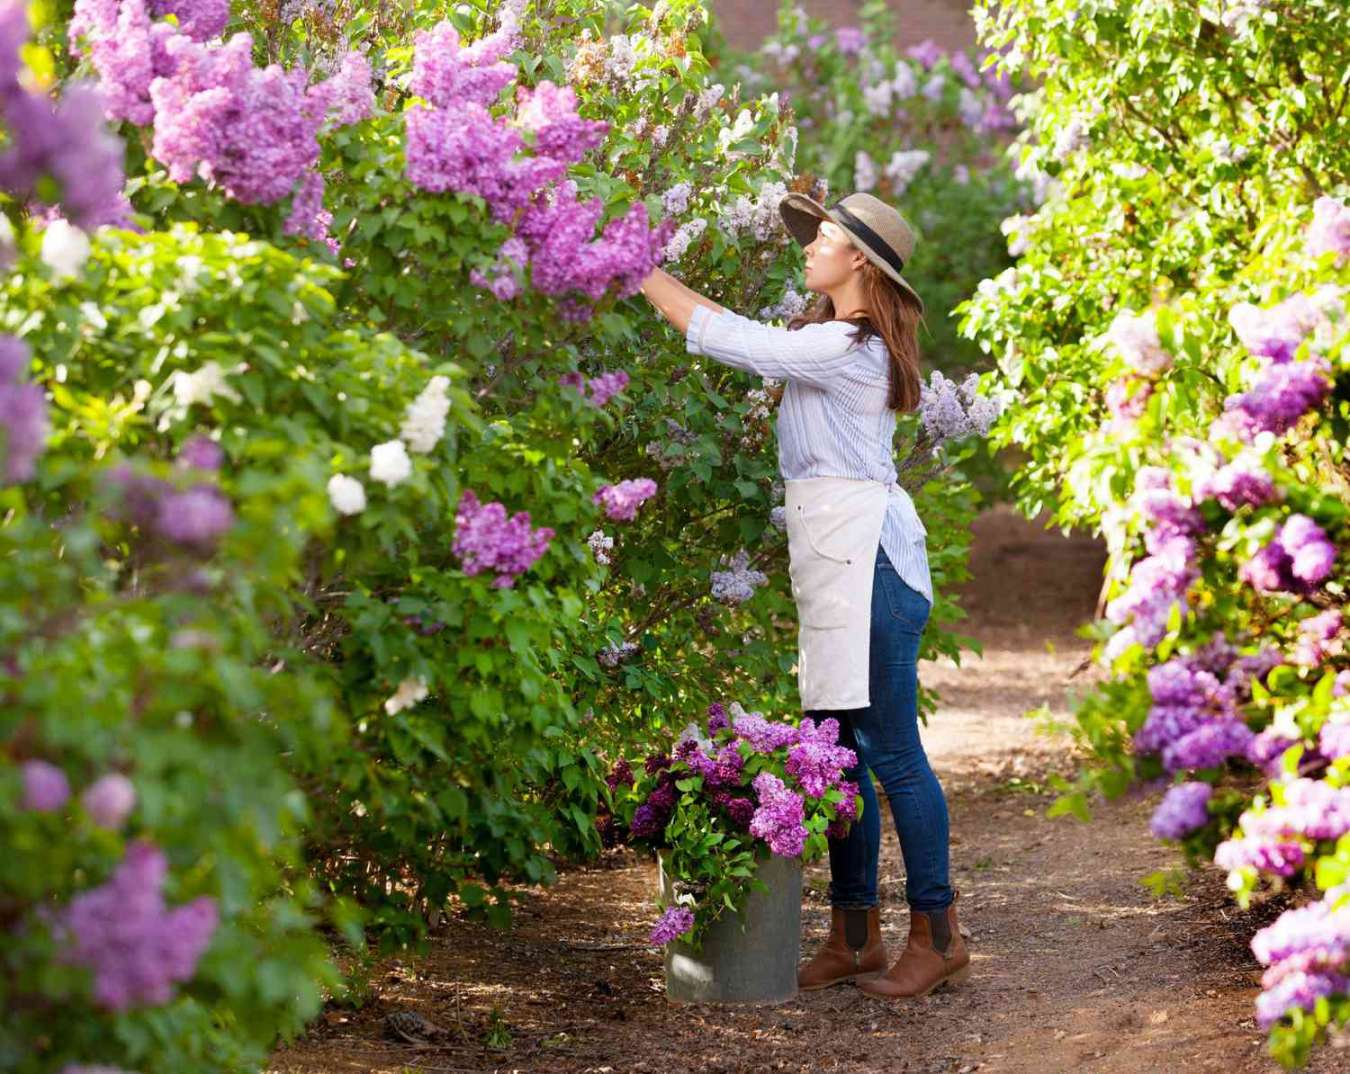 How to Grow, Maintain and Display Beautiful, Fragrant Lilacs